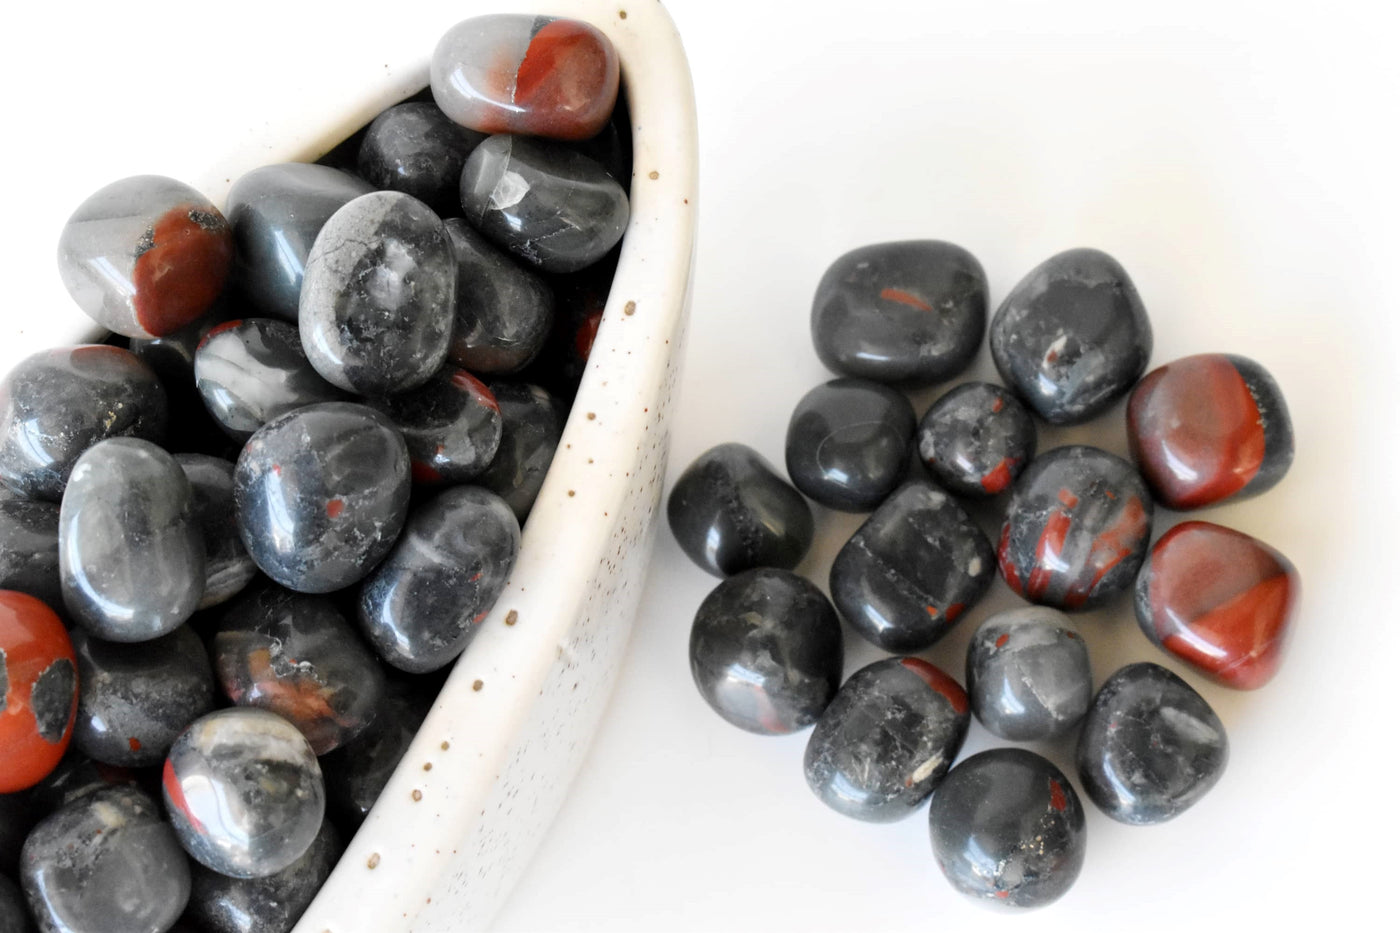 African Bloodstone Tumbled Crystals (Abundance of wealth and Protection)